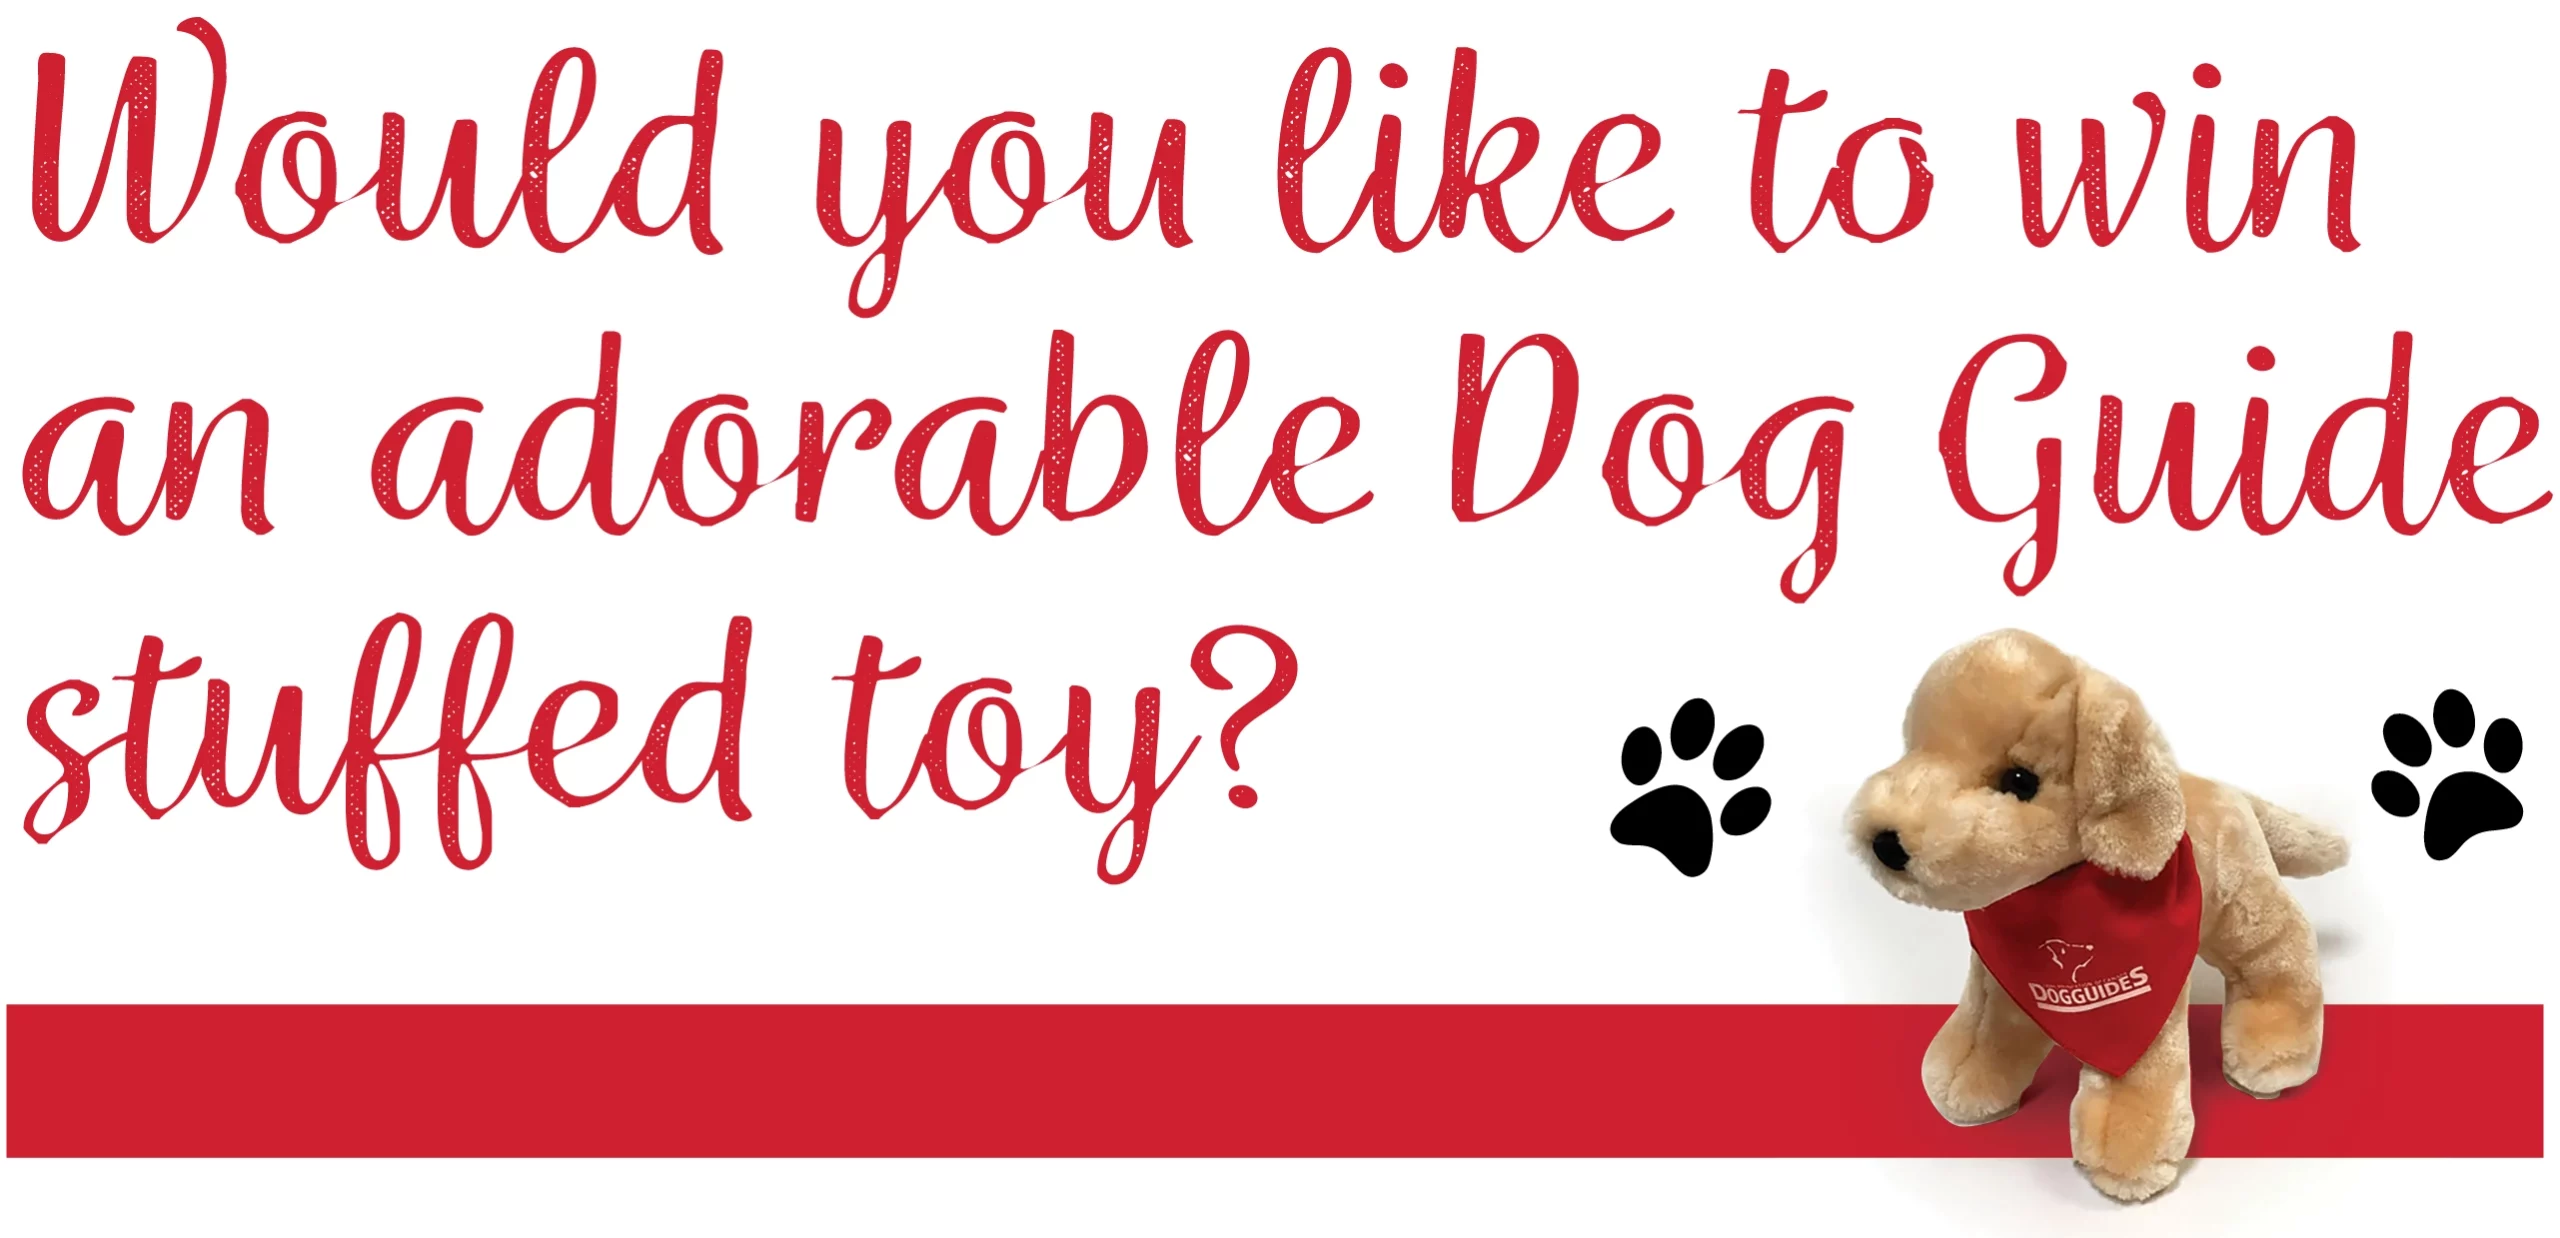 Would you like to win an adorable Dog Guide stuffed toy?